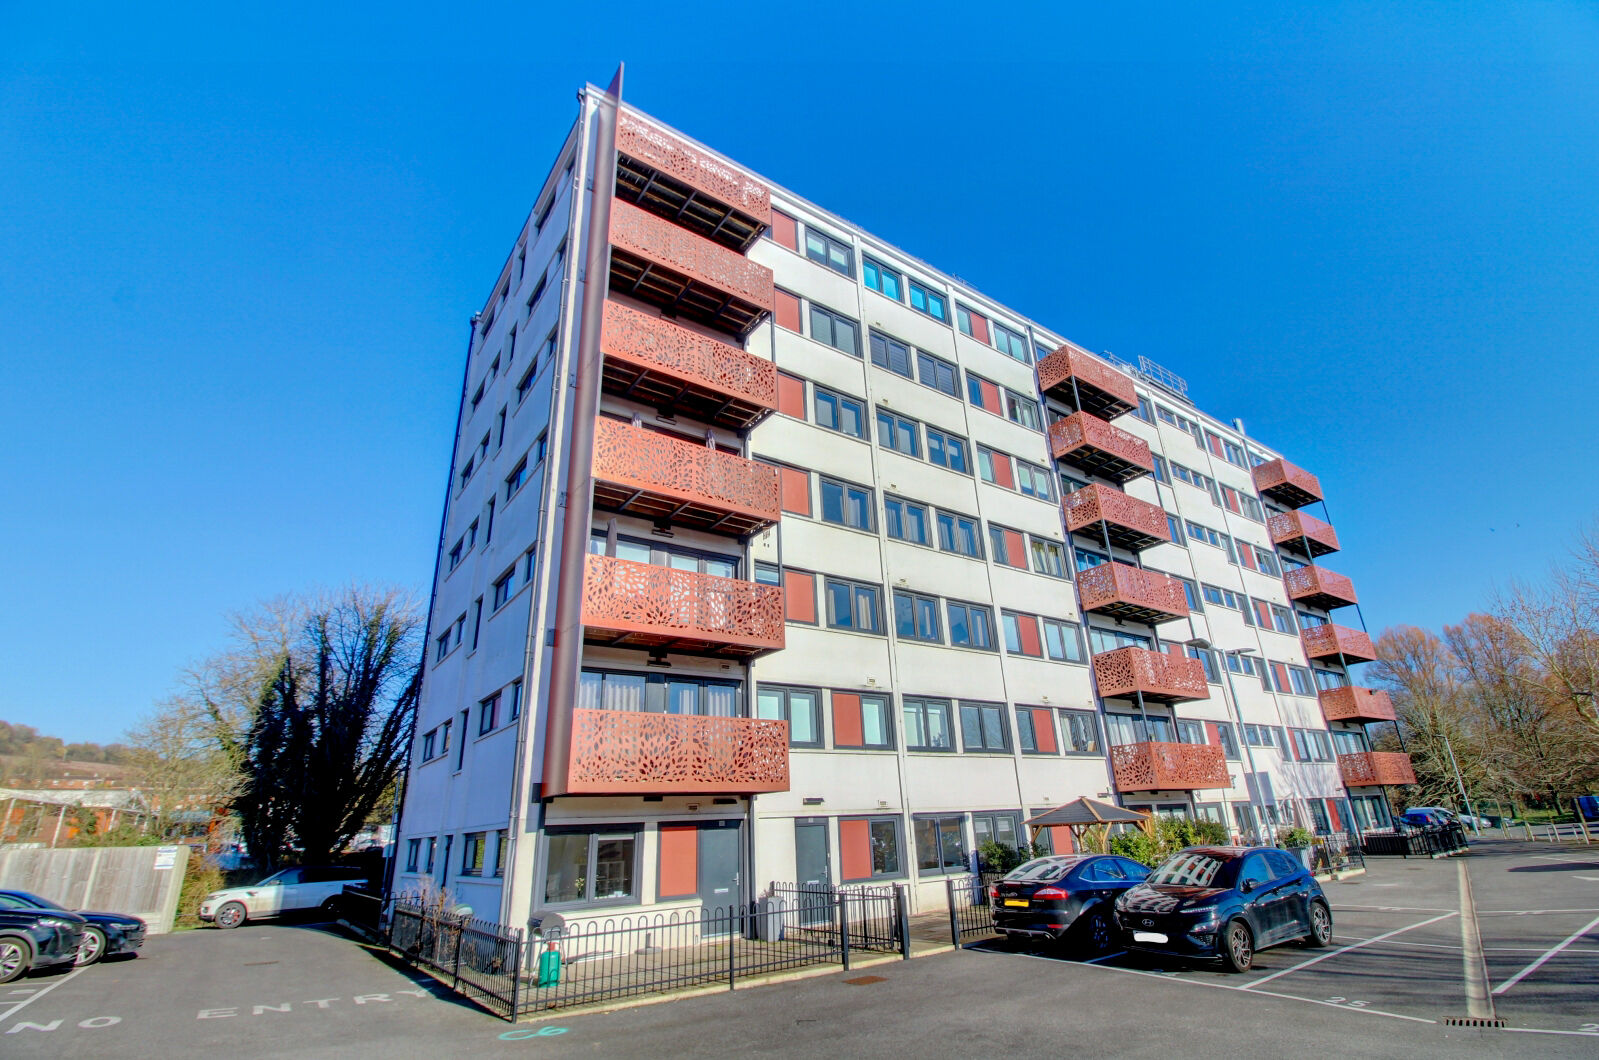 1 bedroom  flat for sale London Road, High Wycombe, HP11, main image